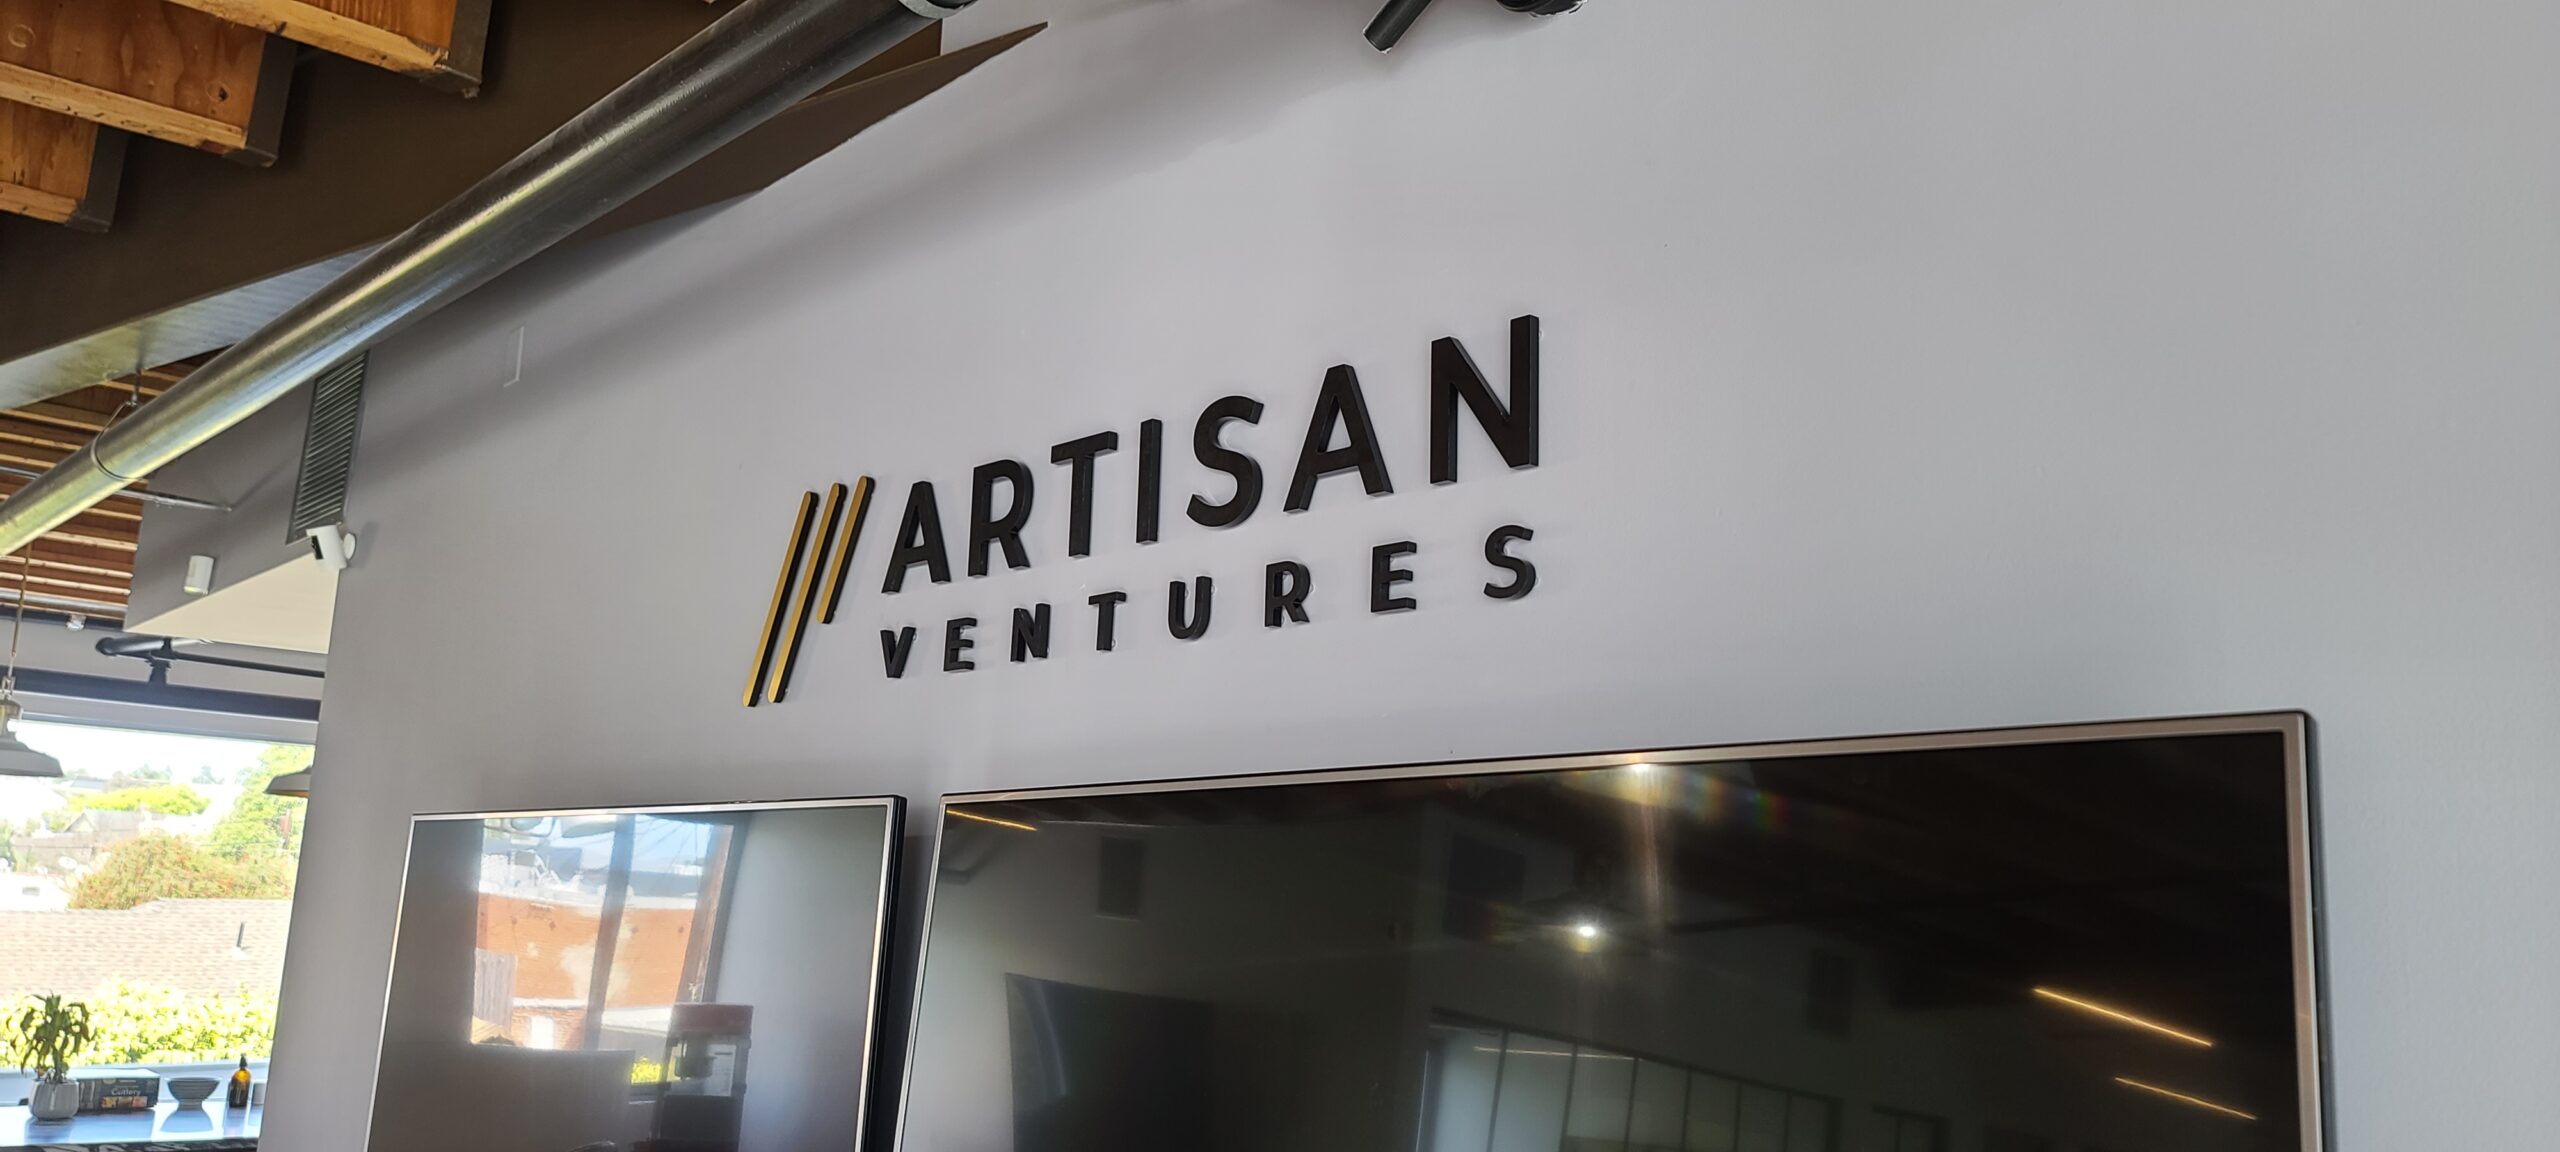 This acrylic wall sign for Artisan Ventures' office in Santa Monica decorates the space, giving it style and boosting their brand's visibility. 